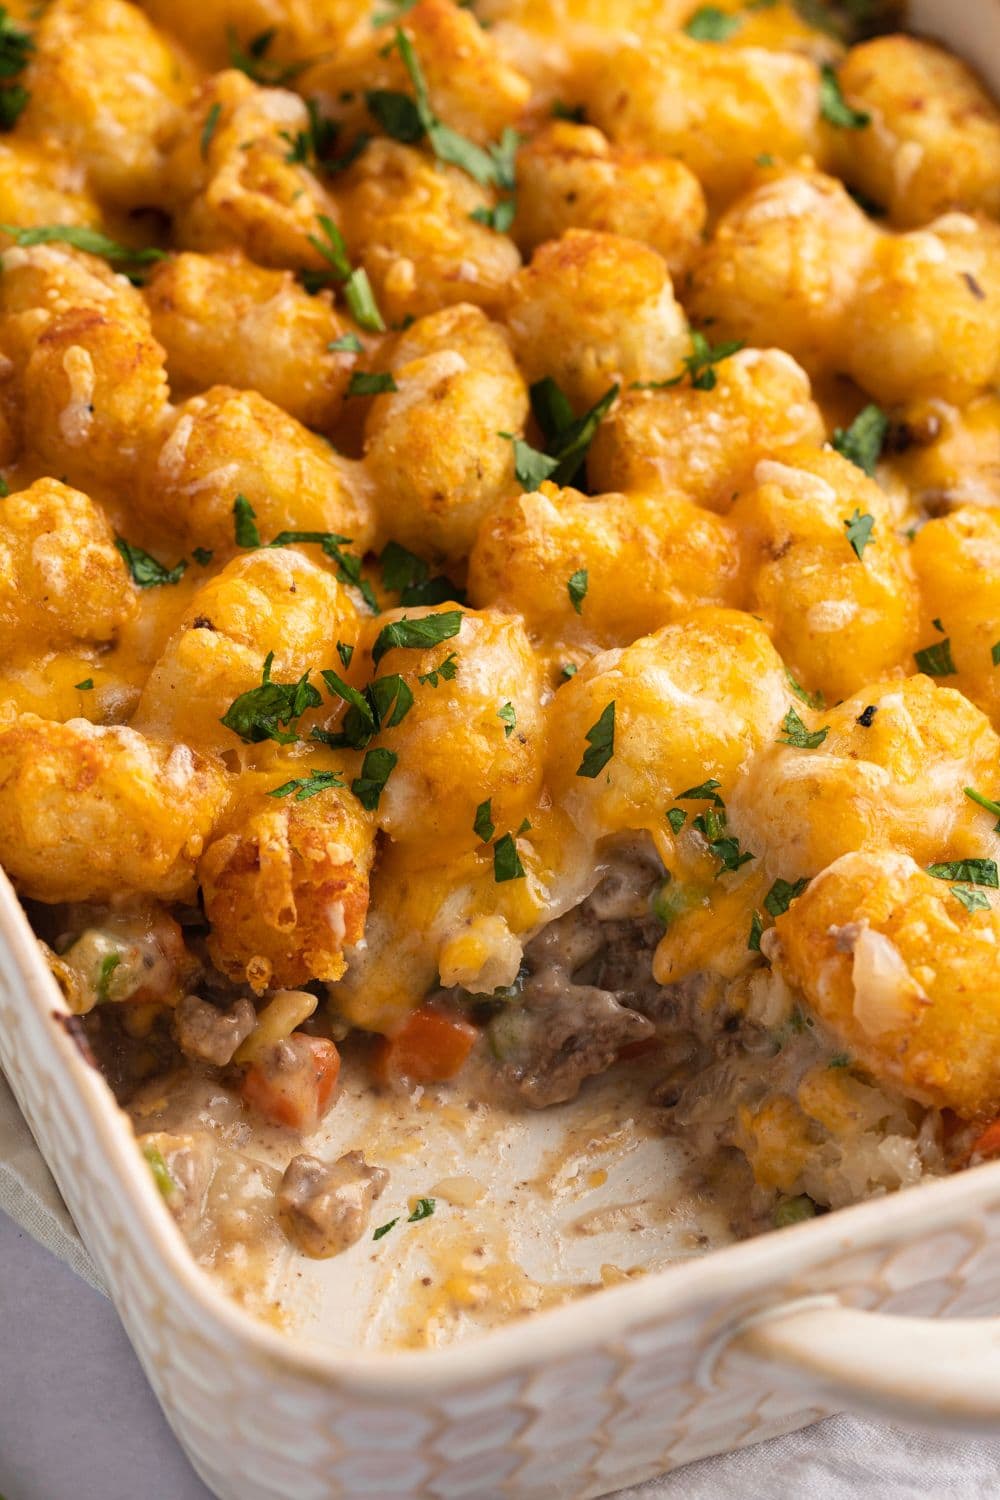 Tater Tot Casserole with Ground Beef